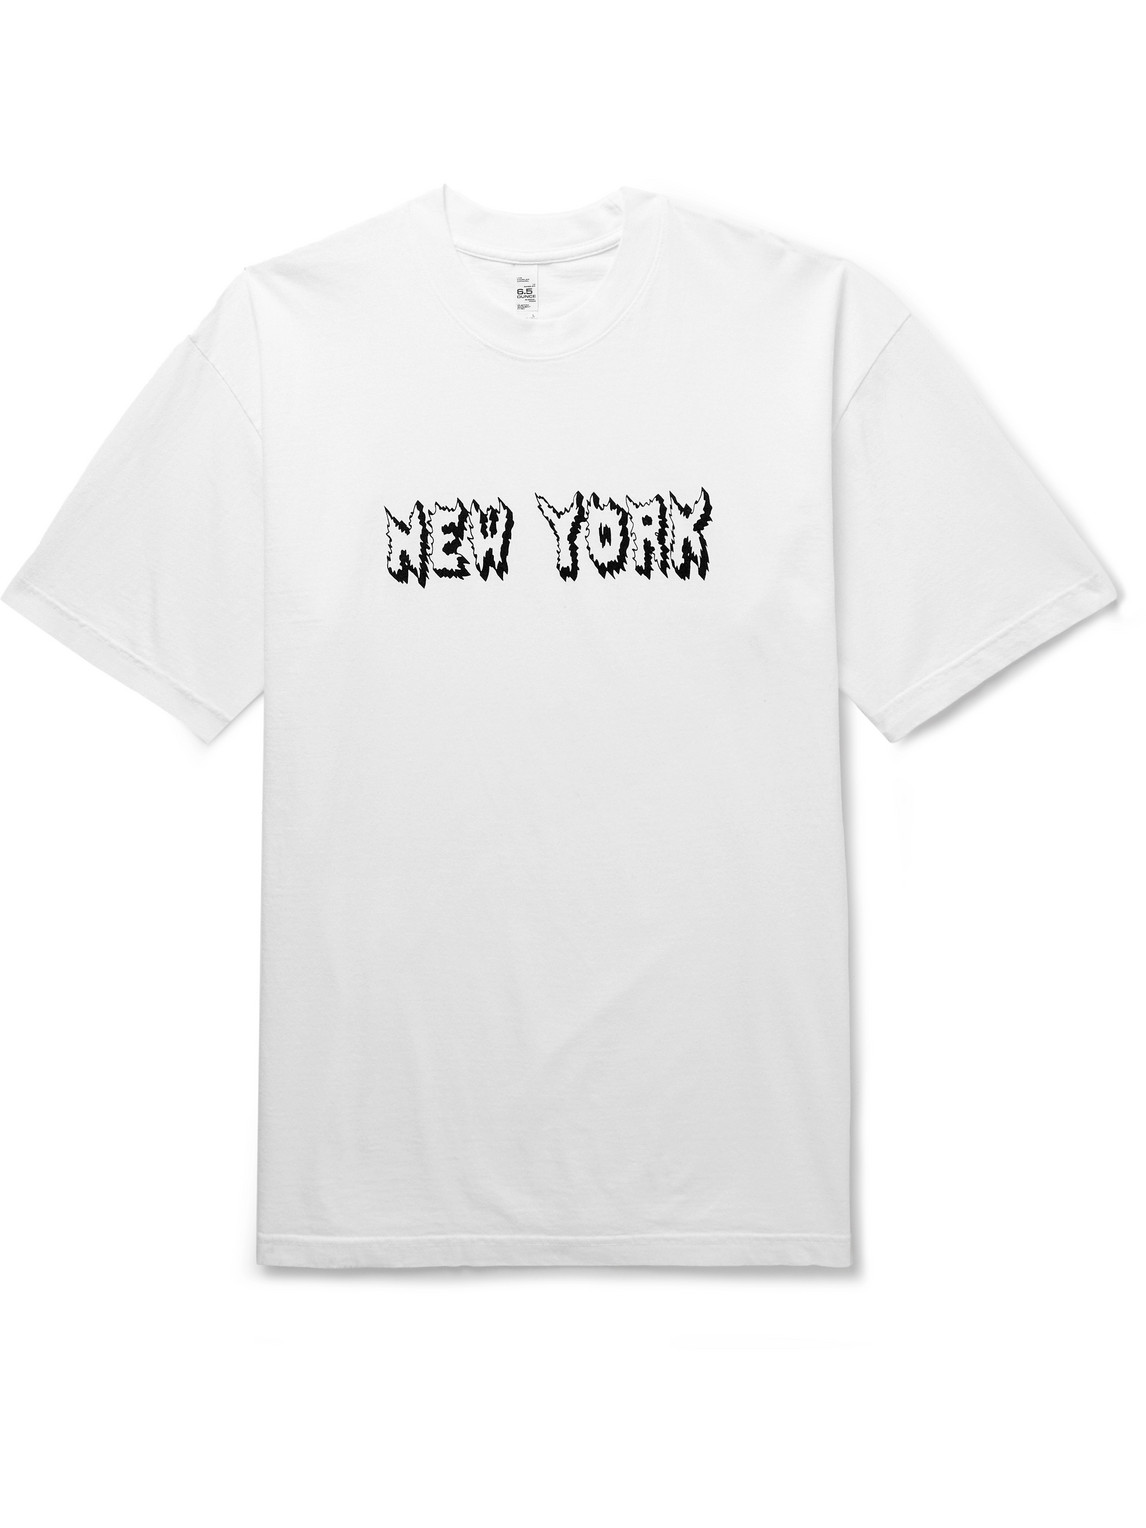 Throwing Fits Garment-dyed Printed Cotton-jersey T-shirt In White